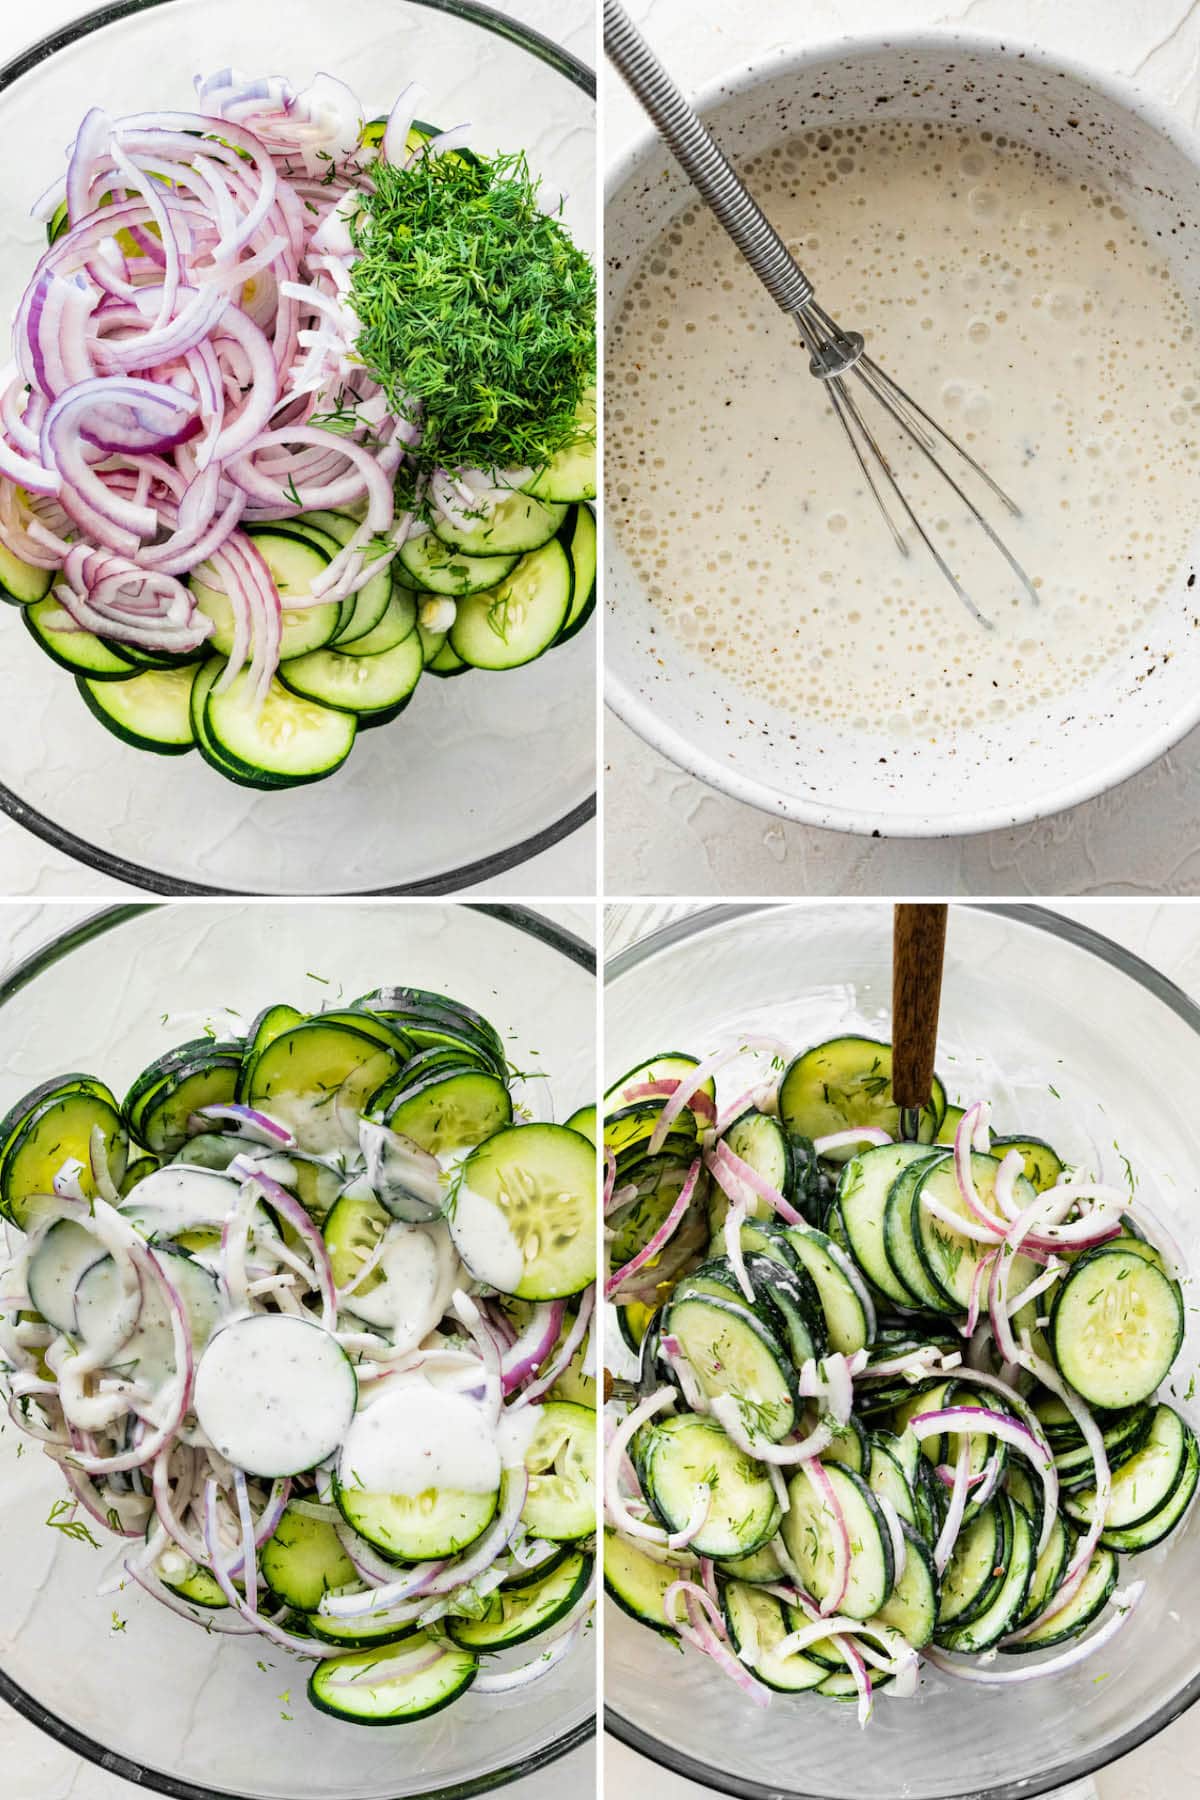 Collage of four photos showing the steps to make Creamy Cucumber Salad: adding onion, cucumber and dill to a bowl, whisking a Greek yogurt dressing and then tossing the salad.